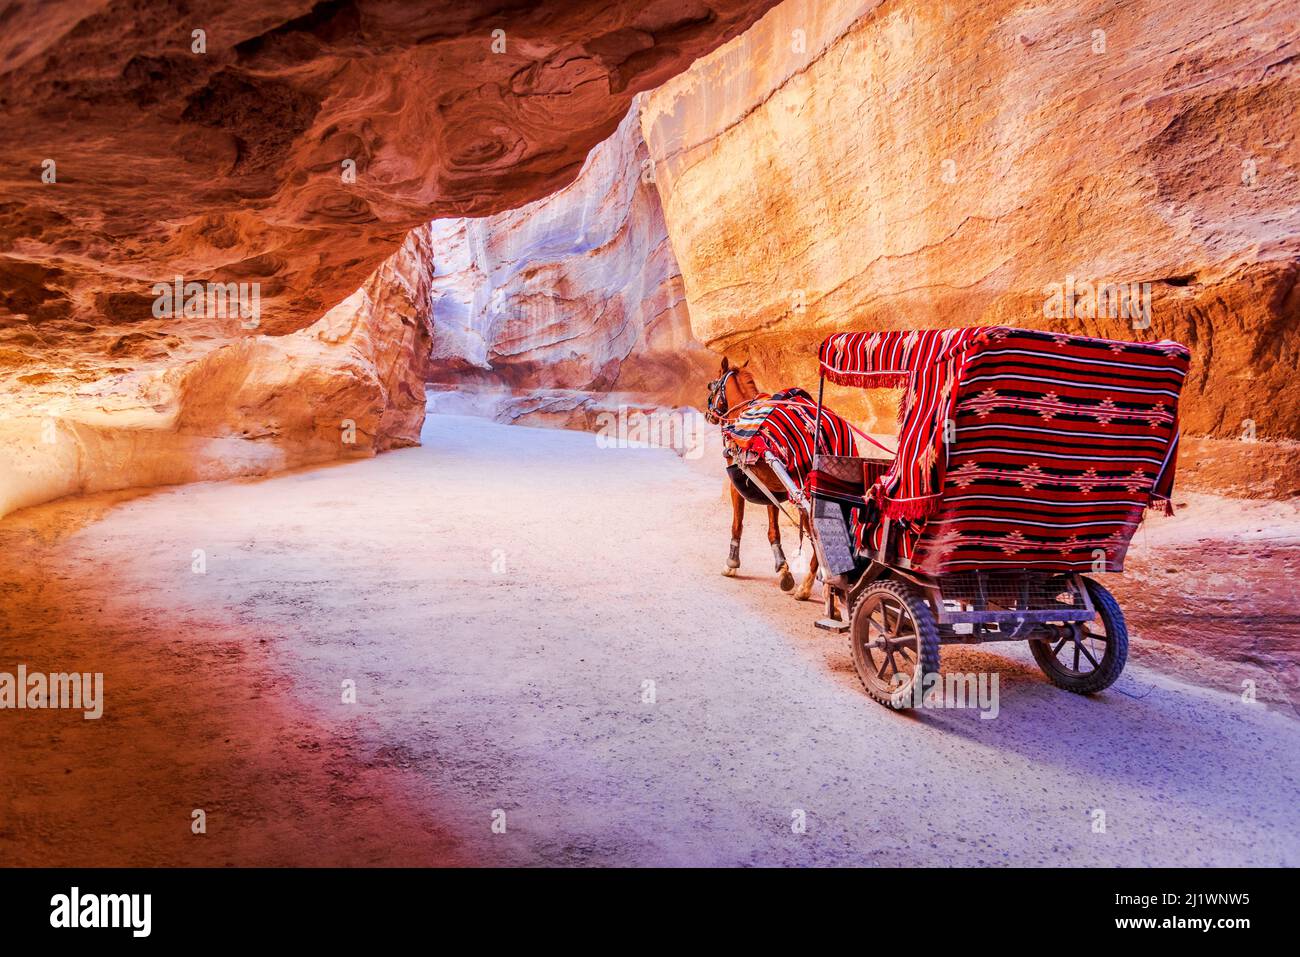 Petra, Jordan. A horse cart carrying tourists on dusty road in Petra, Wadi Rum. One of the worlds greatest archeological sites. Stock Photo